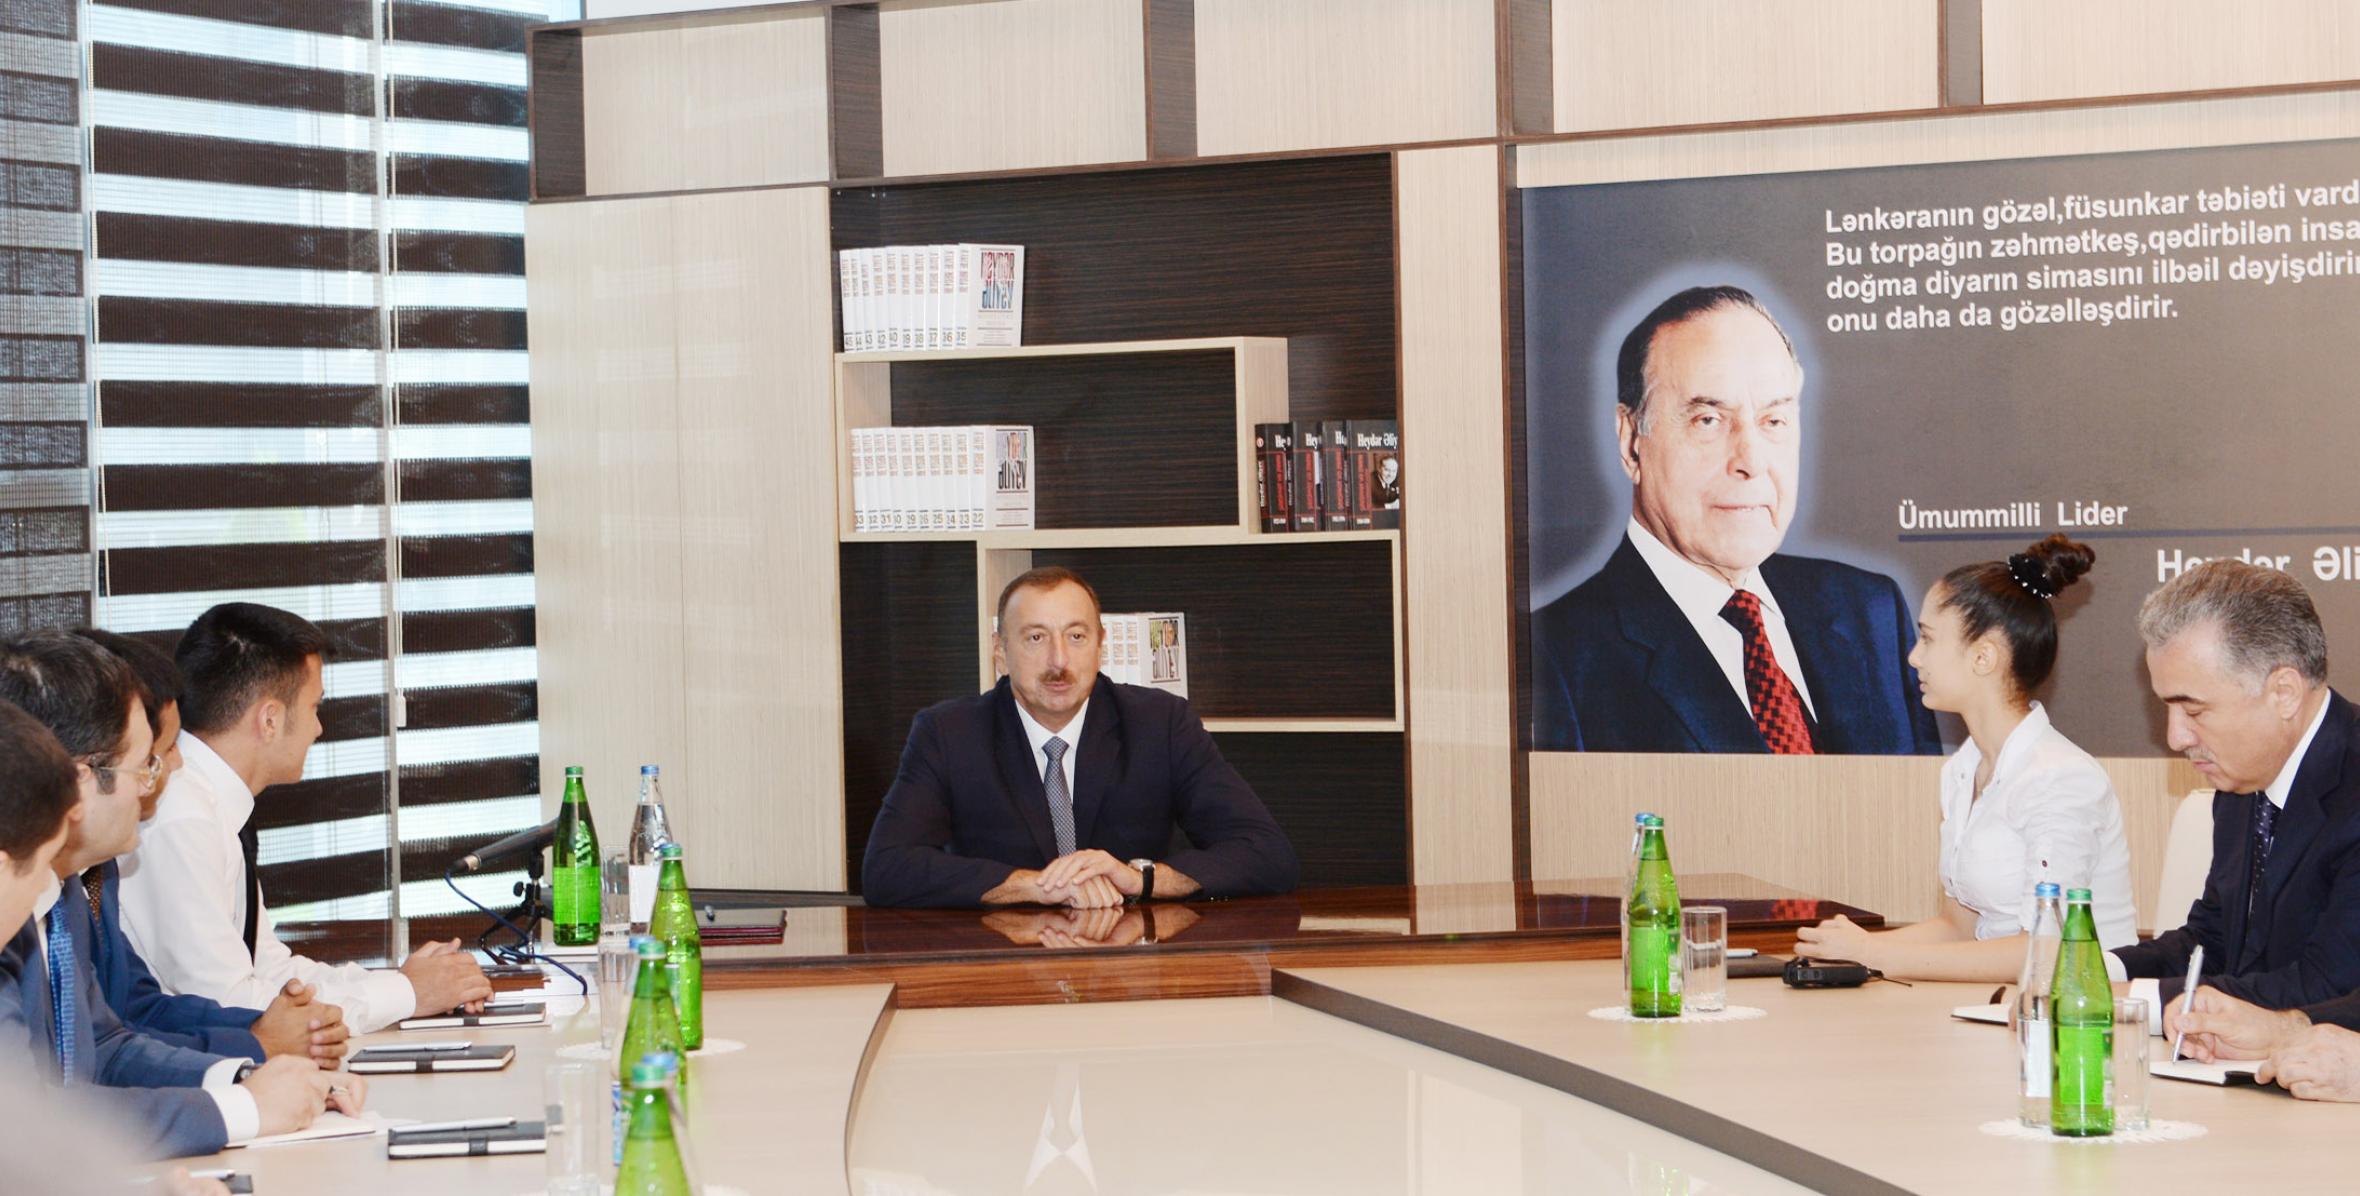 Ilham Aliyev attended the opening of a Youth Center in Lankaran